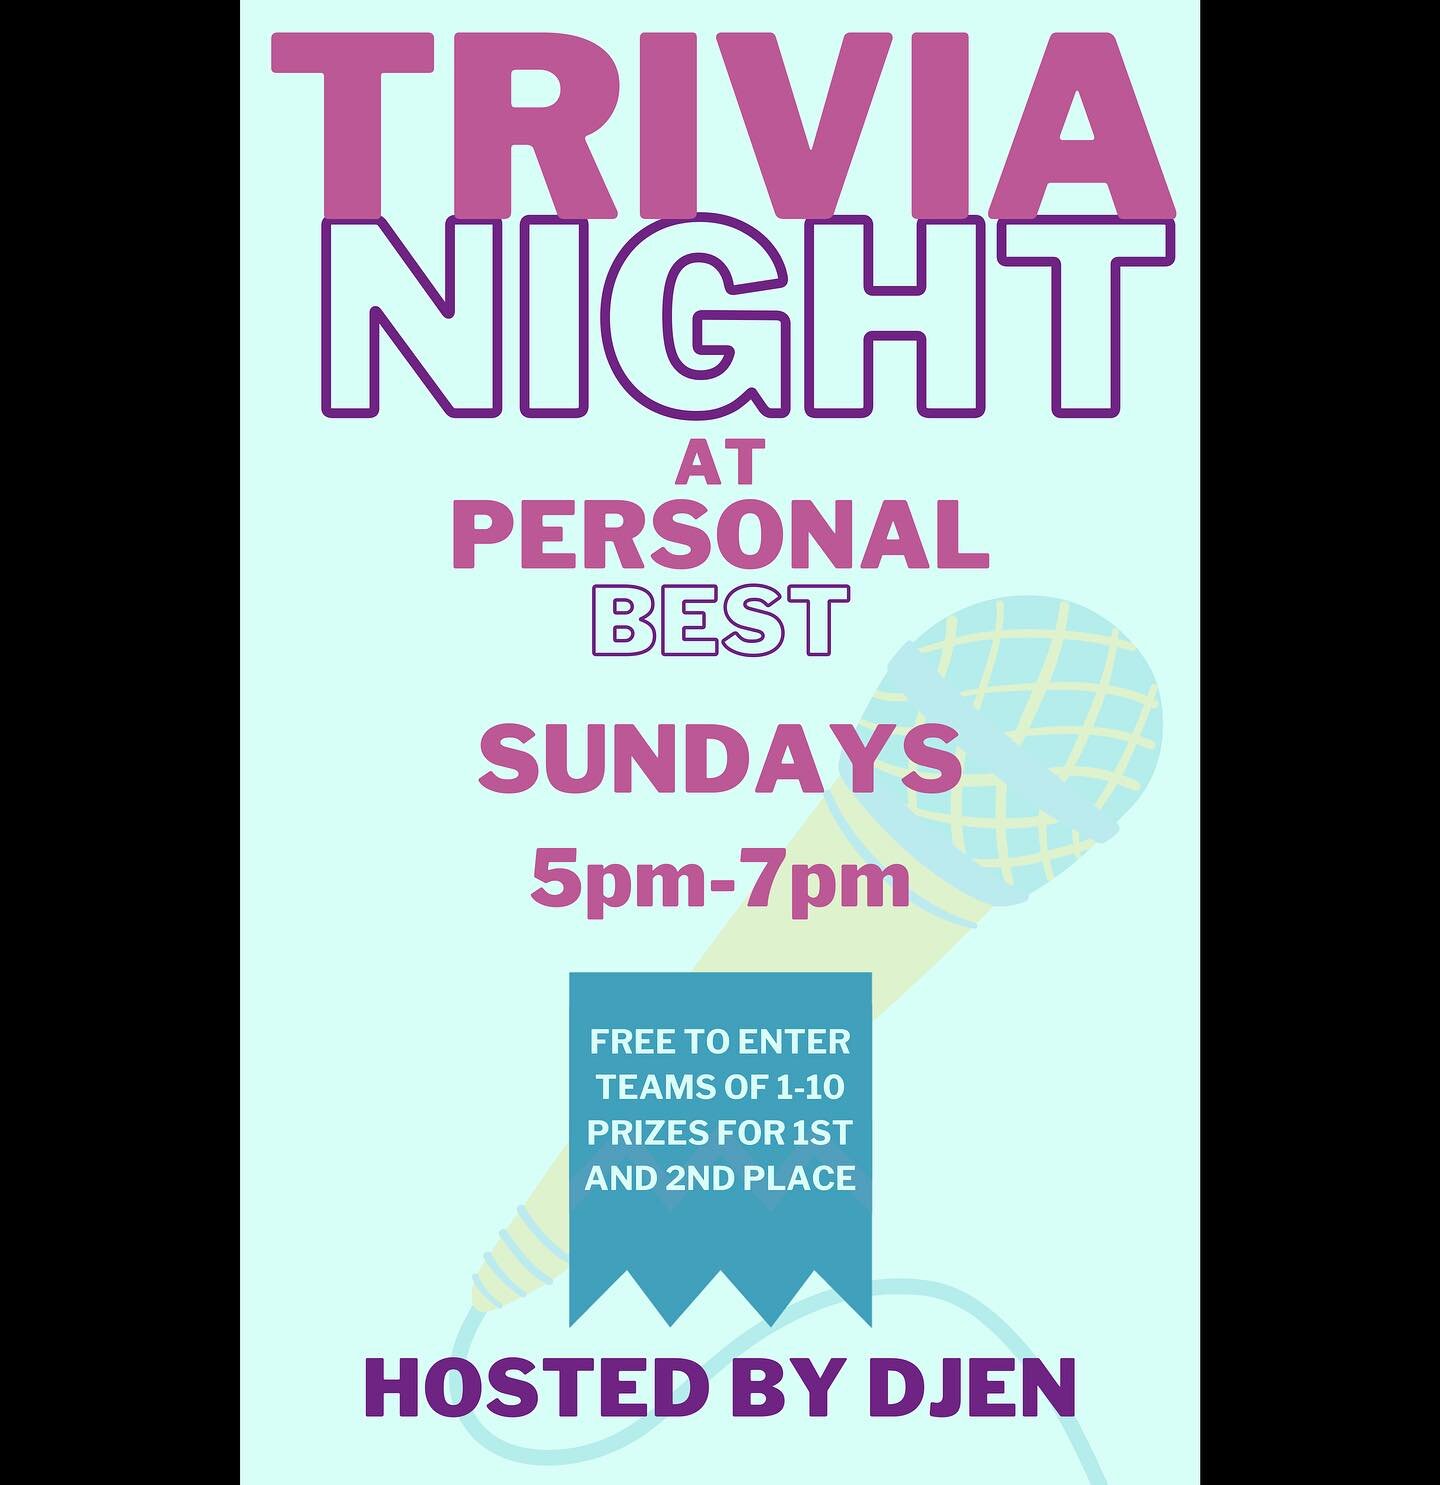 Personal Best is ecstatic to announce that this Sunday (March 24), and every Sunday thereafter we will have Trivia Night starting at 5pm in the Taproom. There will be prizes every week for the 1st and 2nd place teams, all ages are welcome and there i